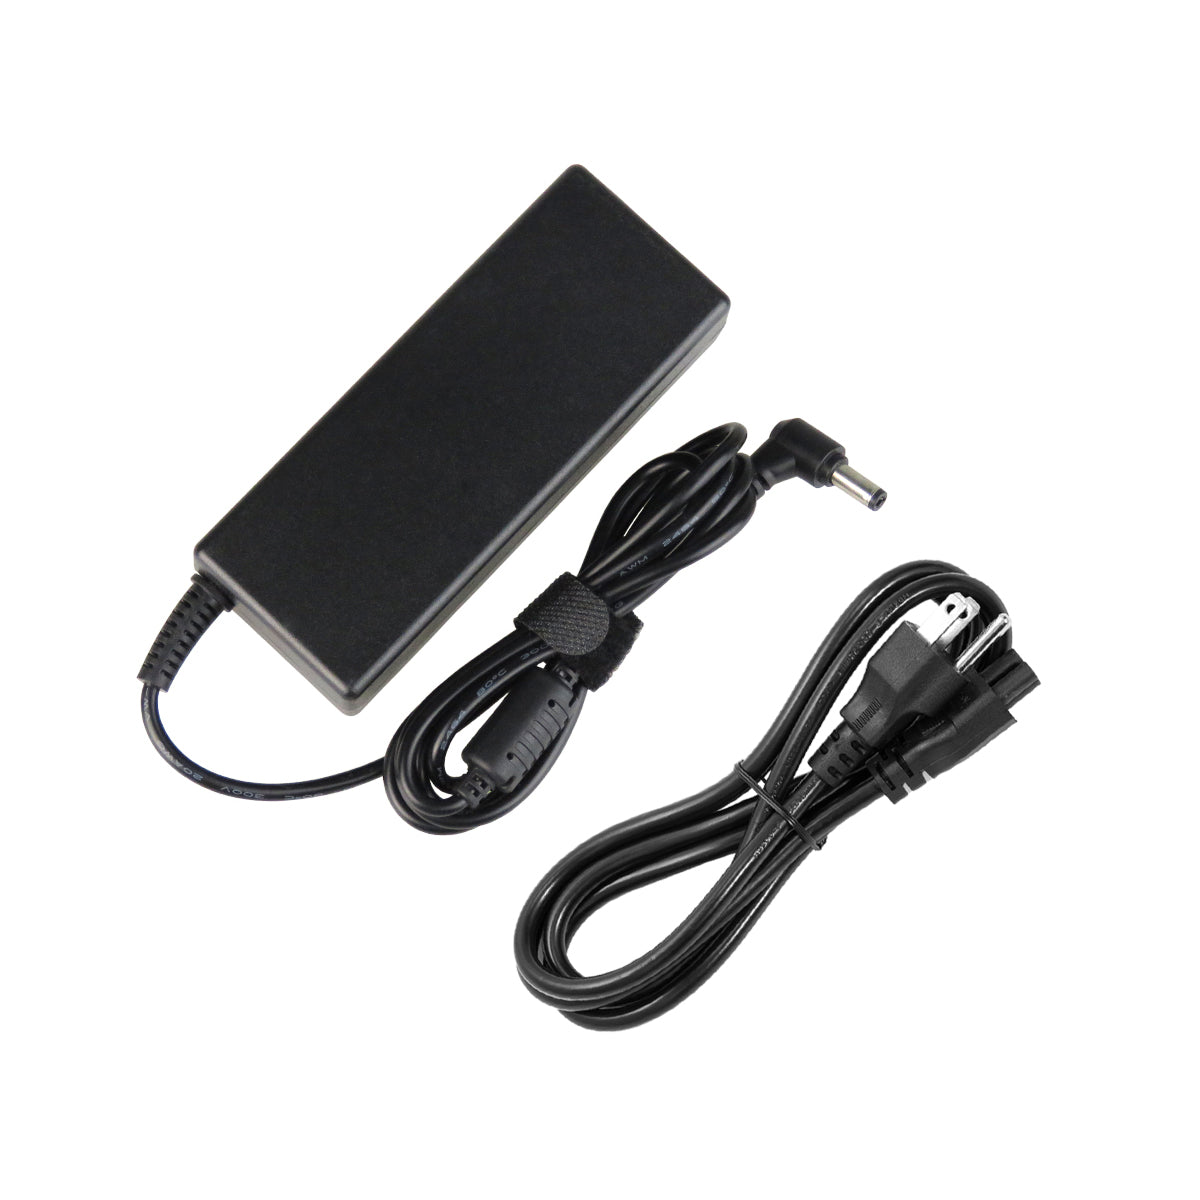 AC Adapter Charger for ASUS Q400A Notebook.